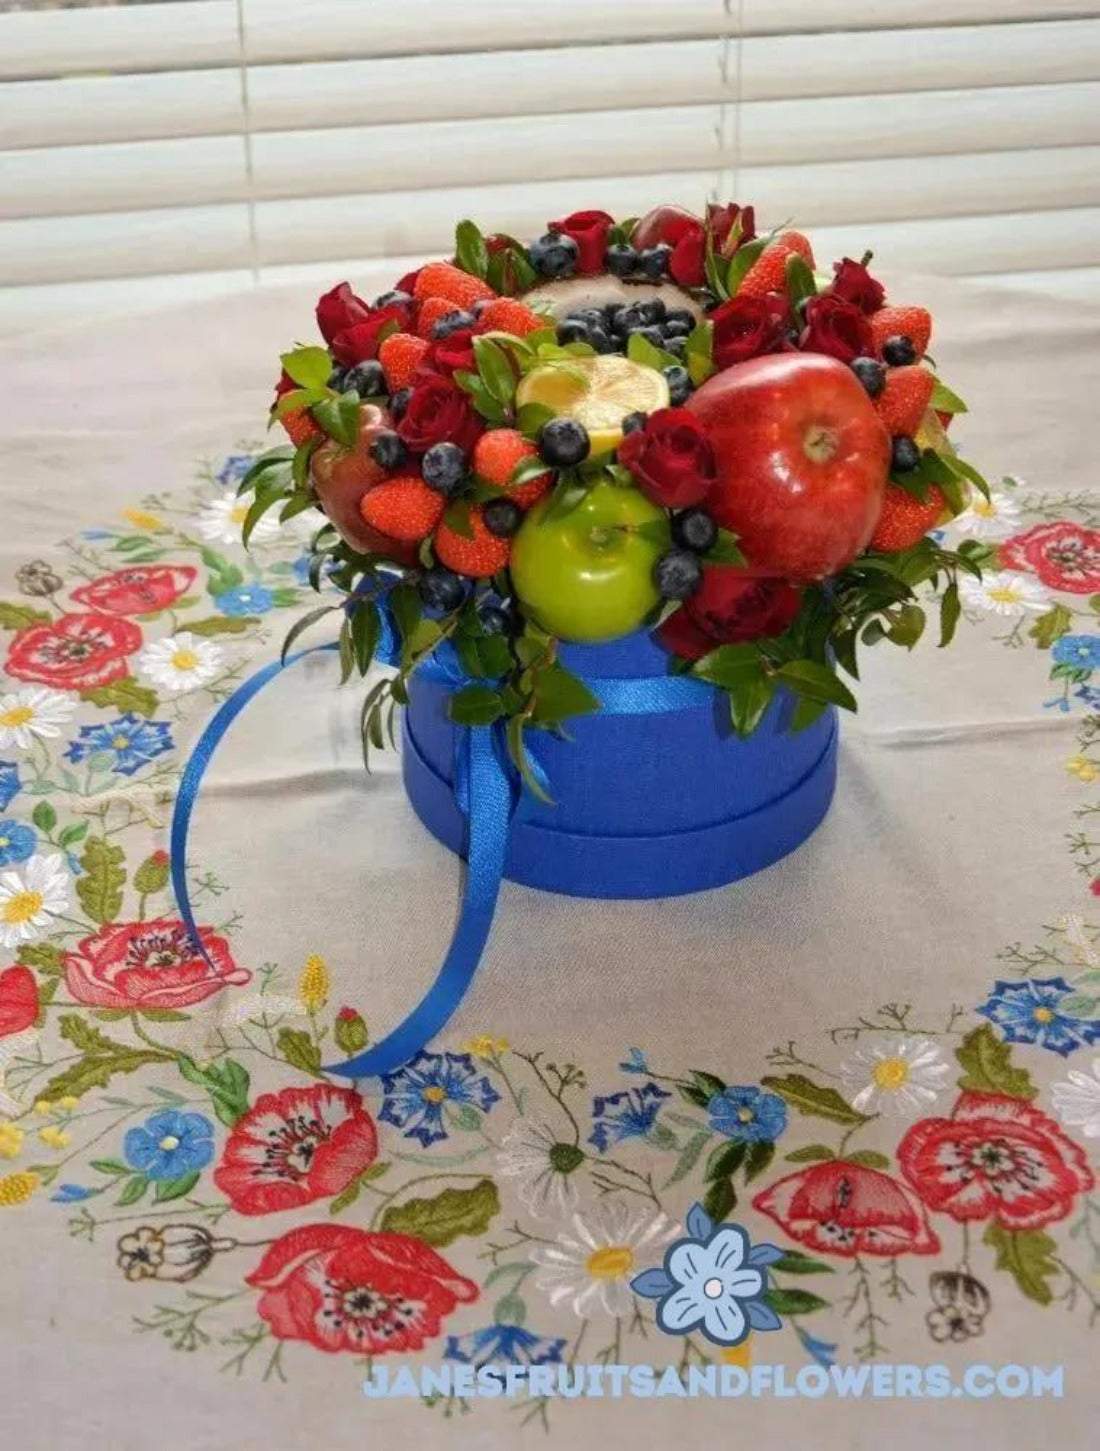 Miracle Bouquet - Jane's Fruits And Flowers